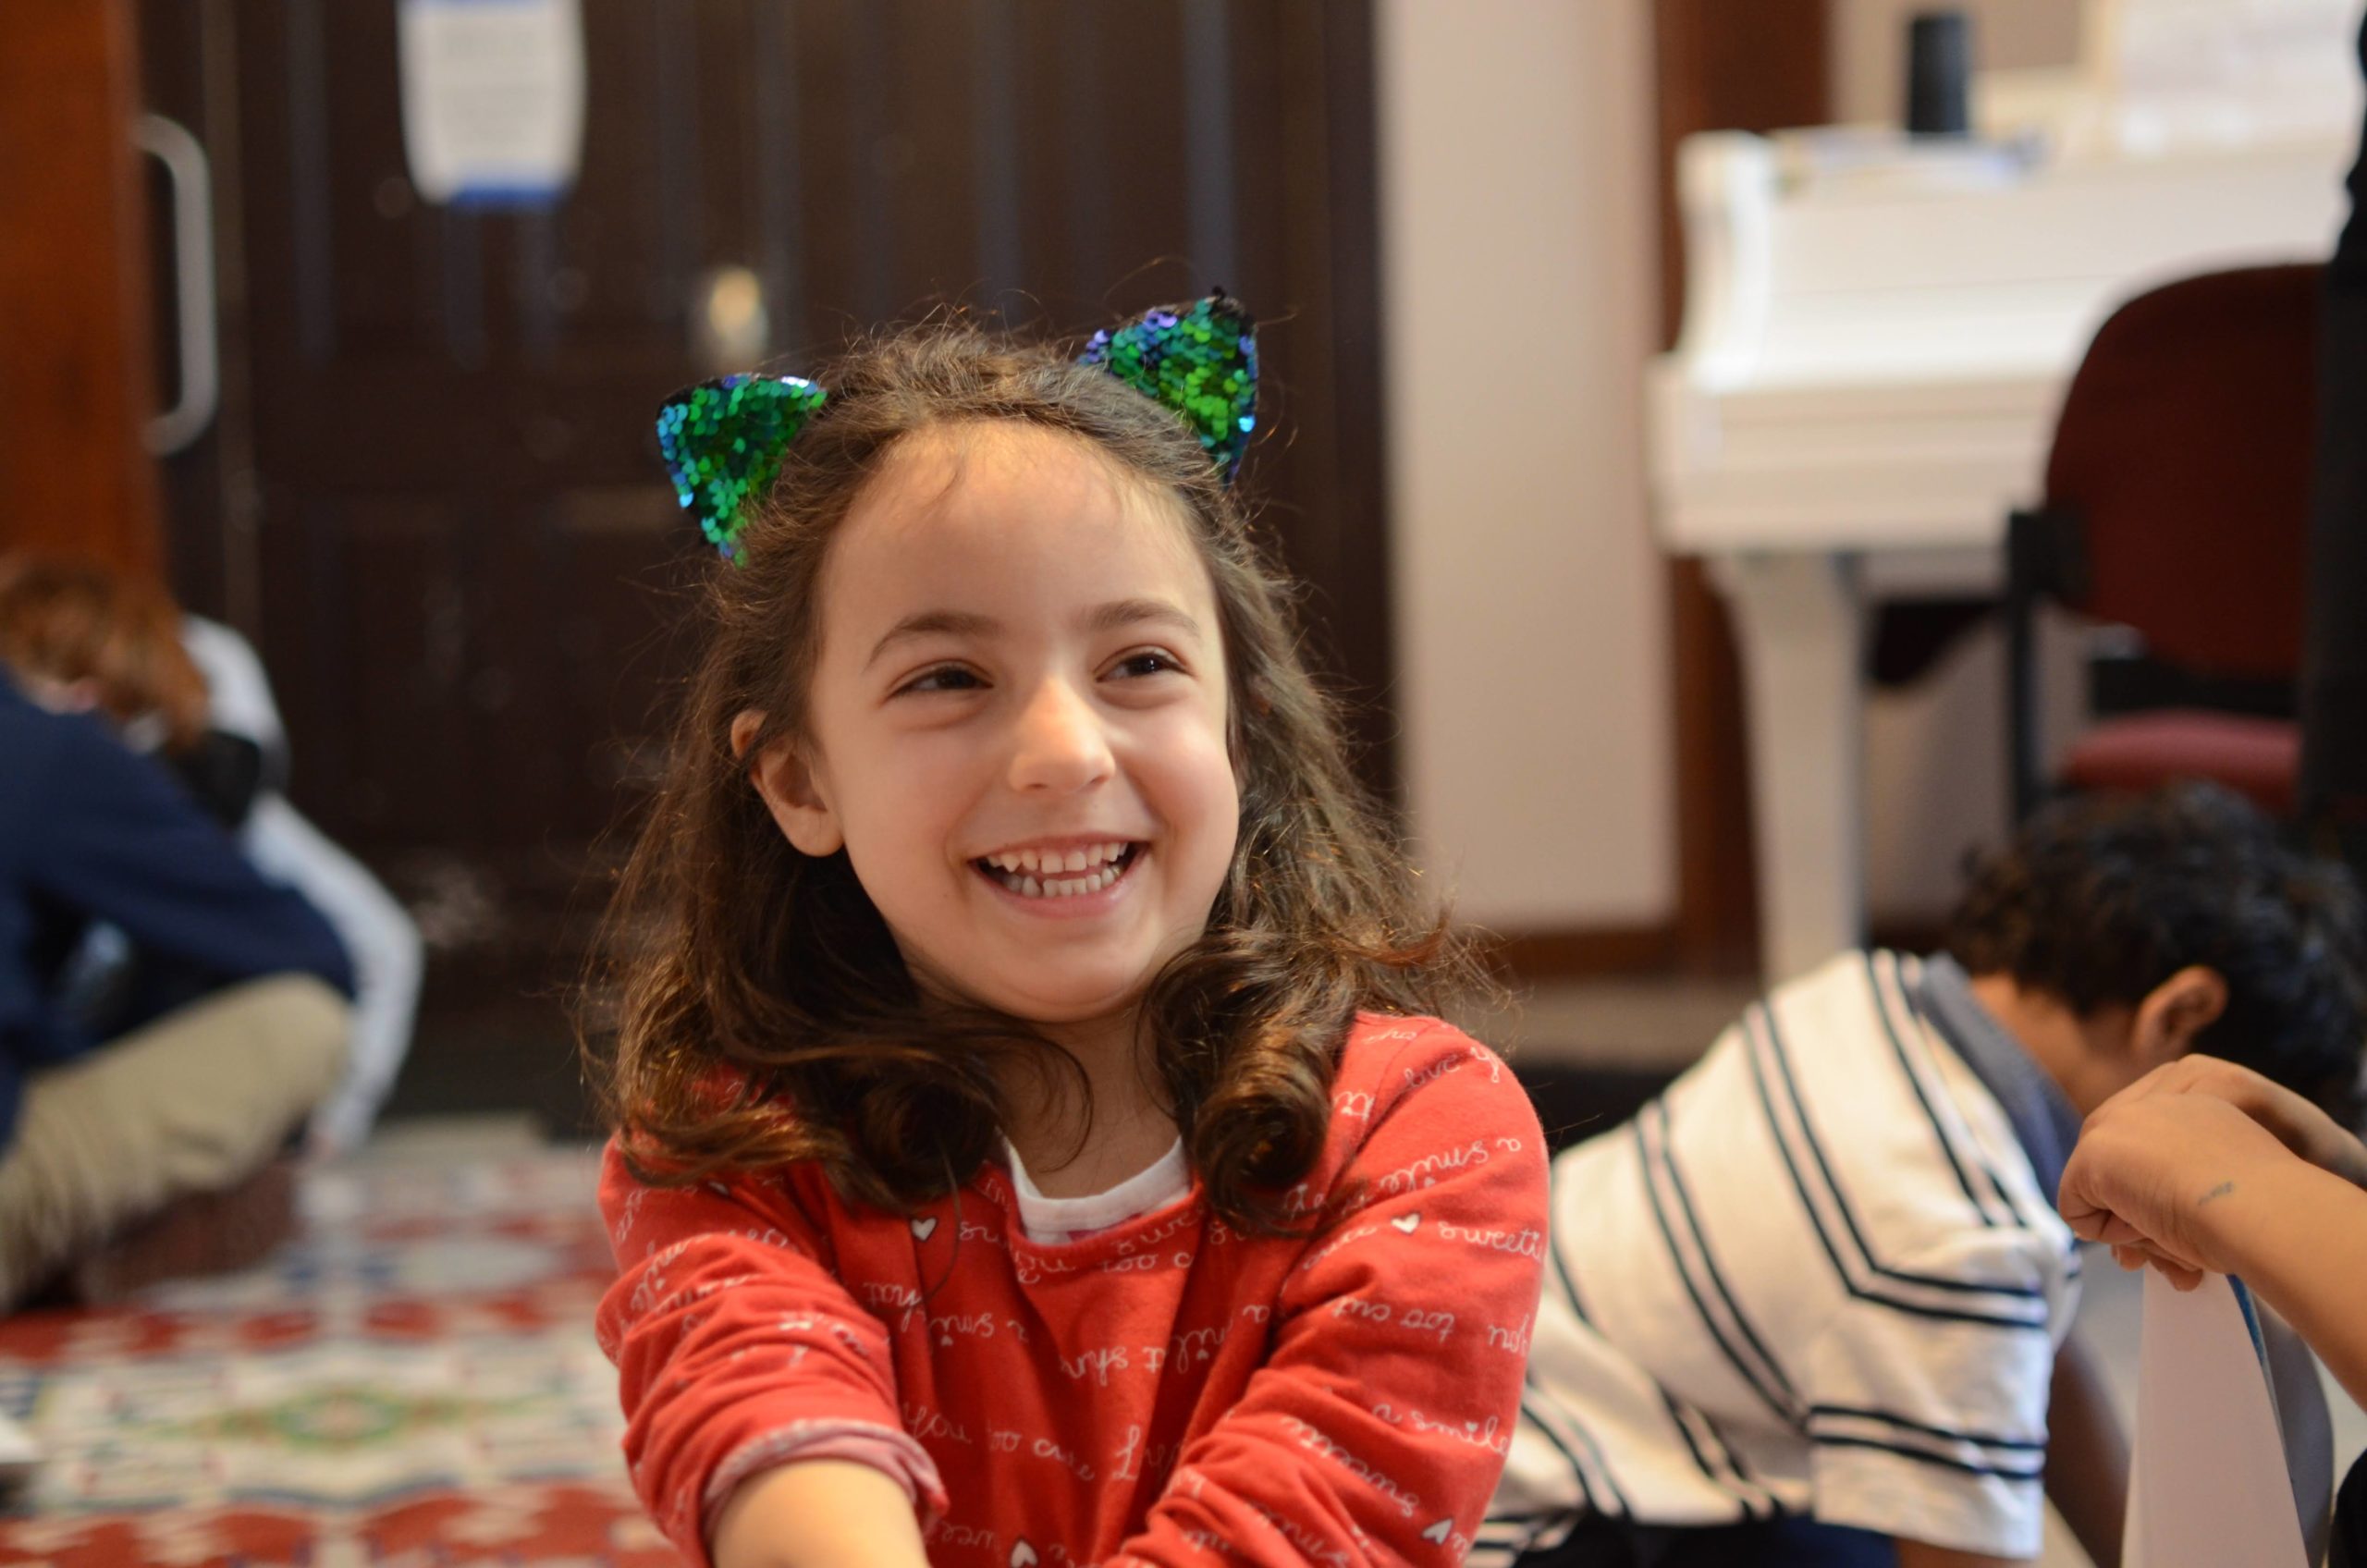 A 6-year-old kid wearing a sparkly cat-ear headband grins at someone sitting to the side of the camera